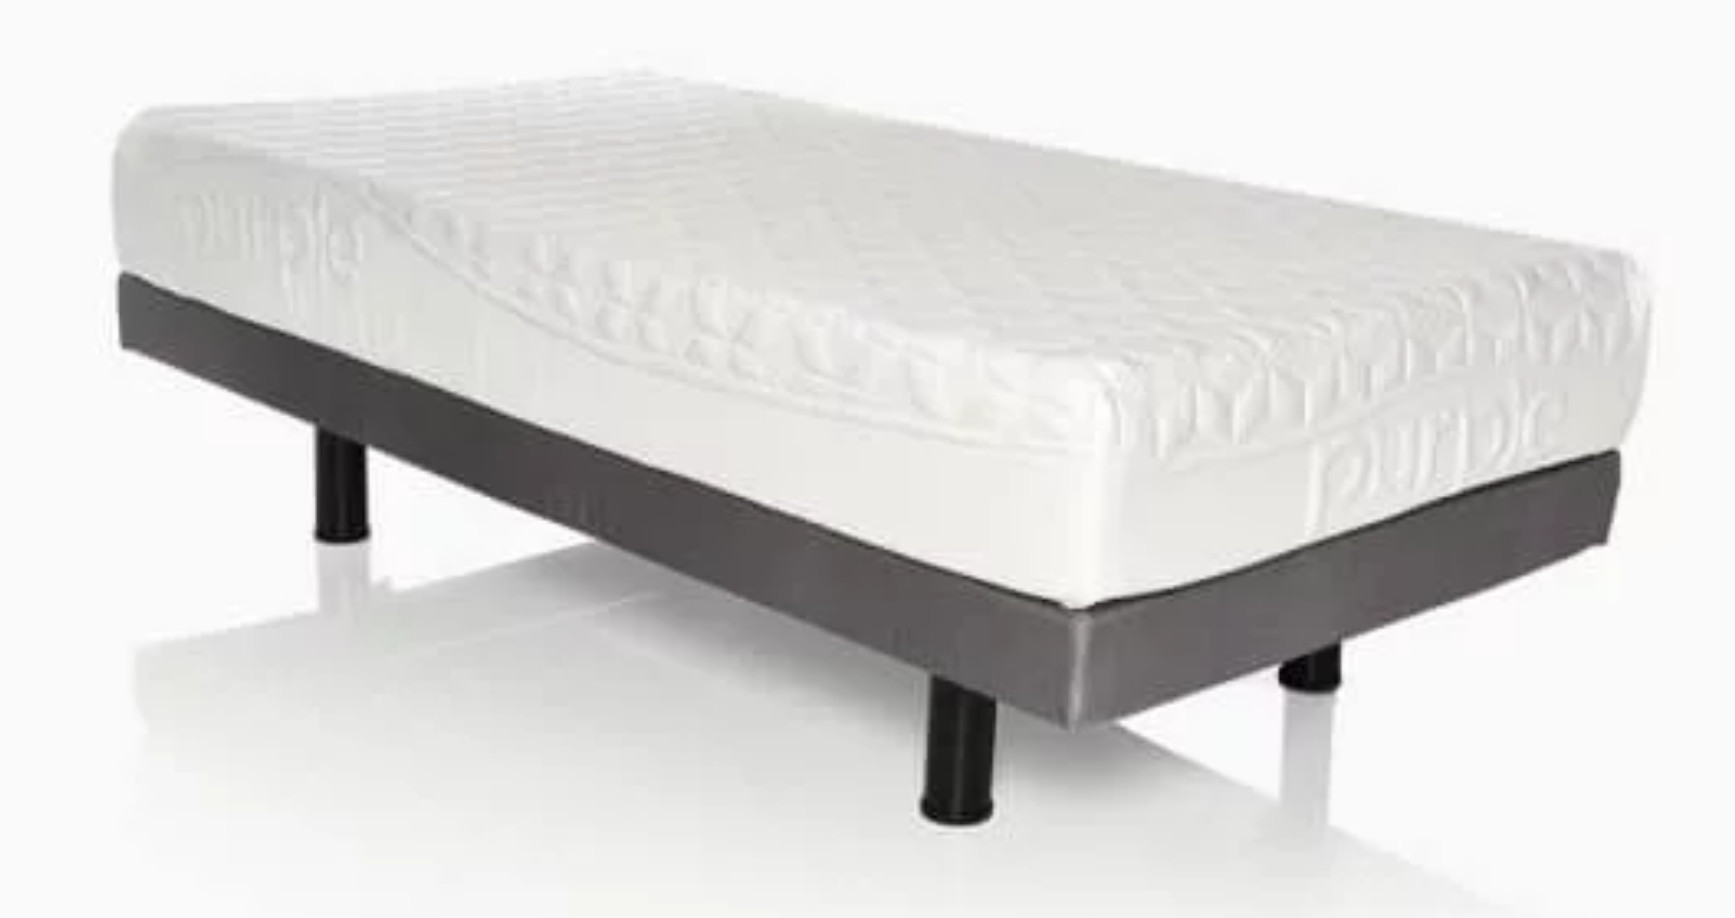 review for the adjustable bed frame by purple